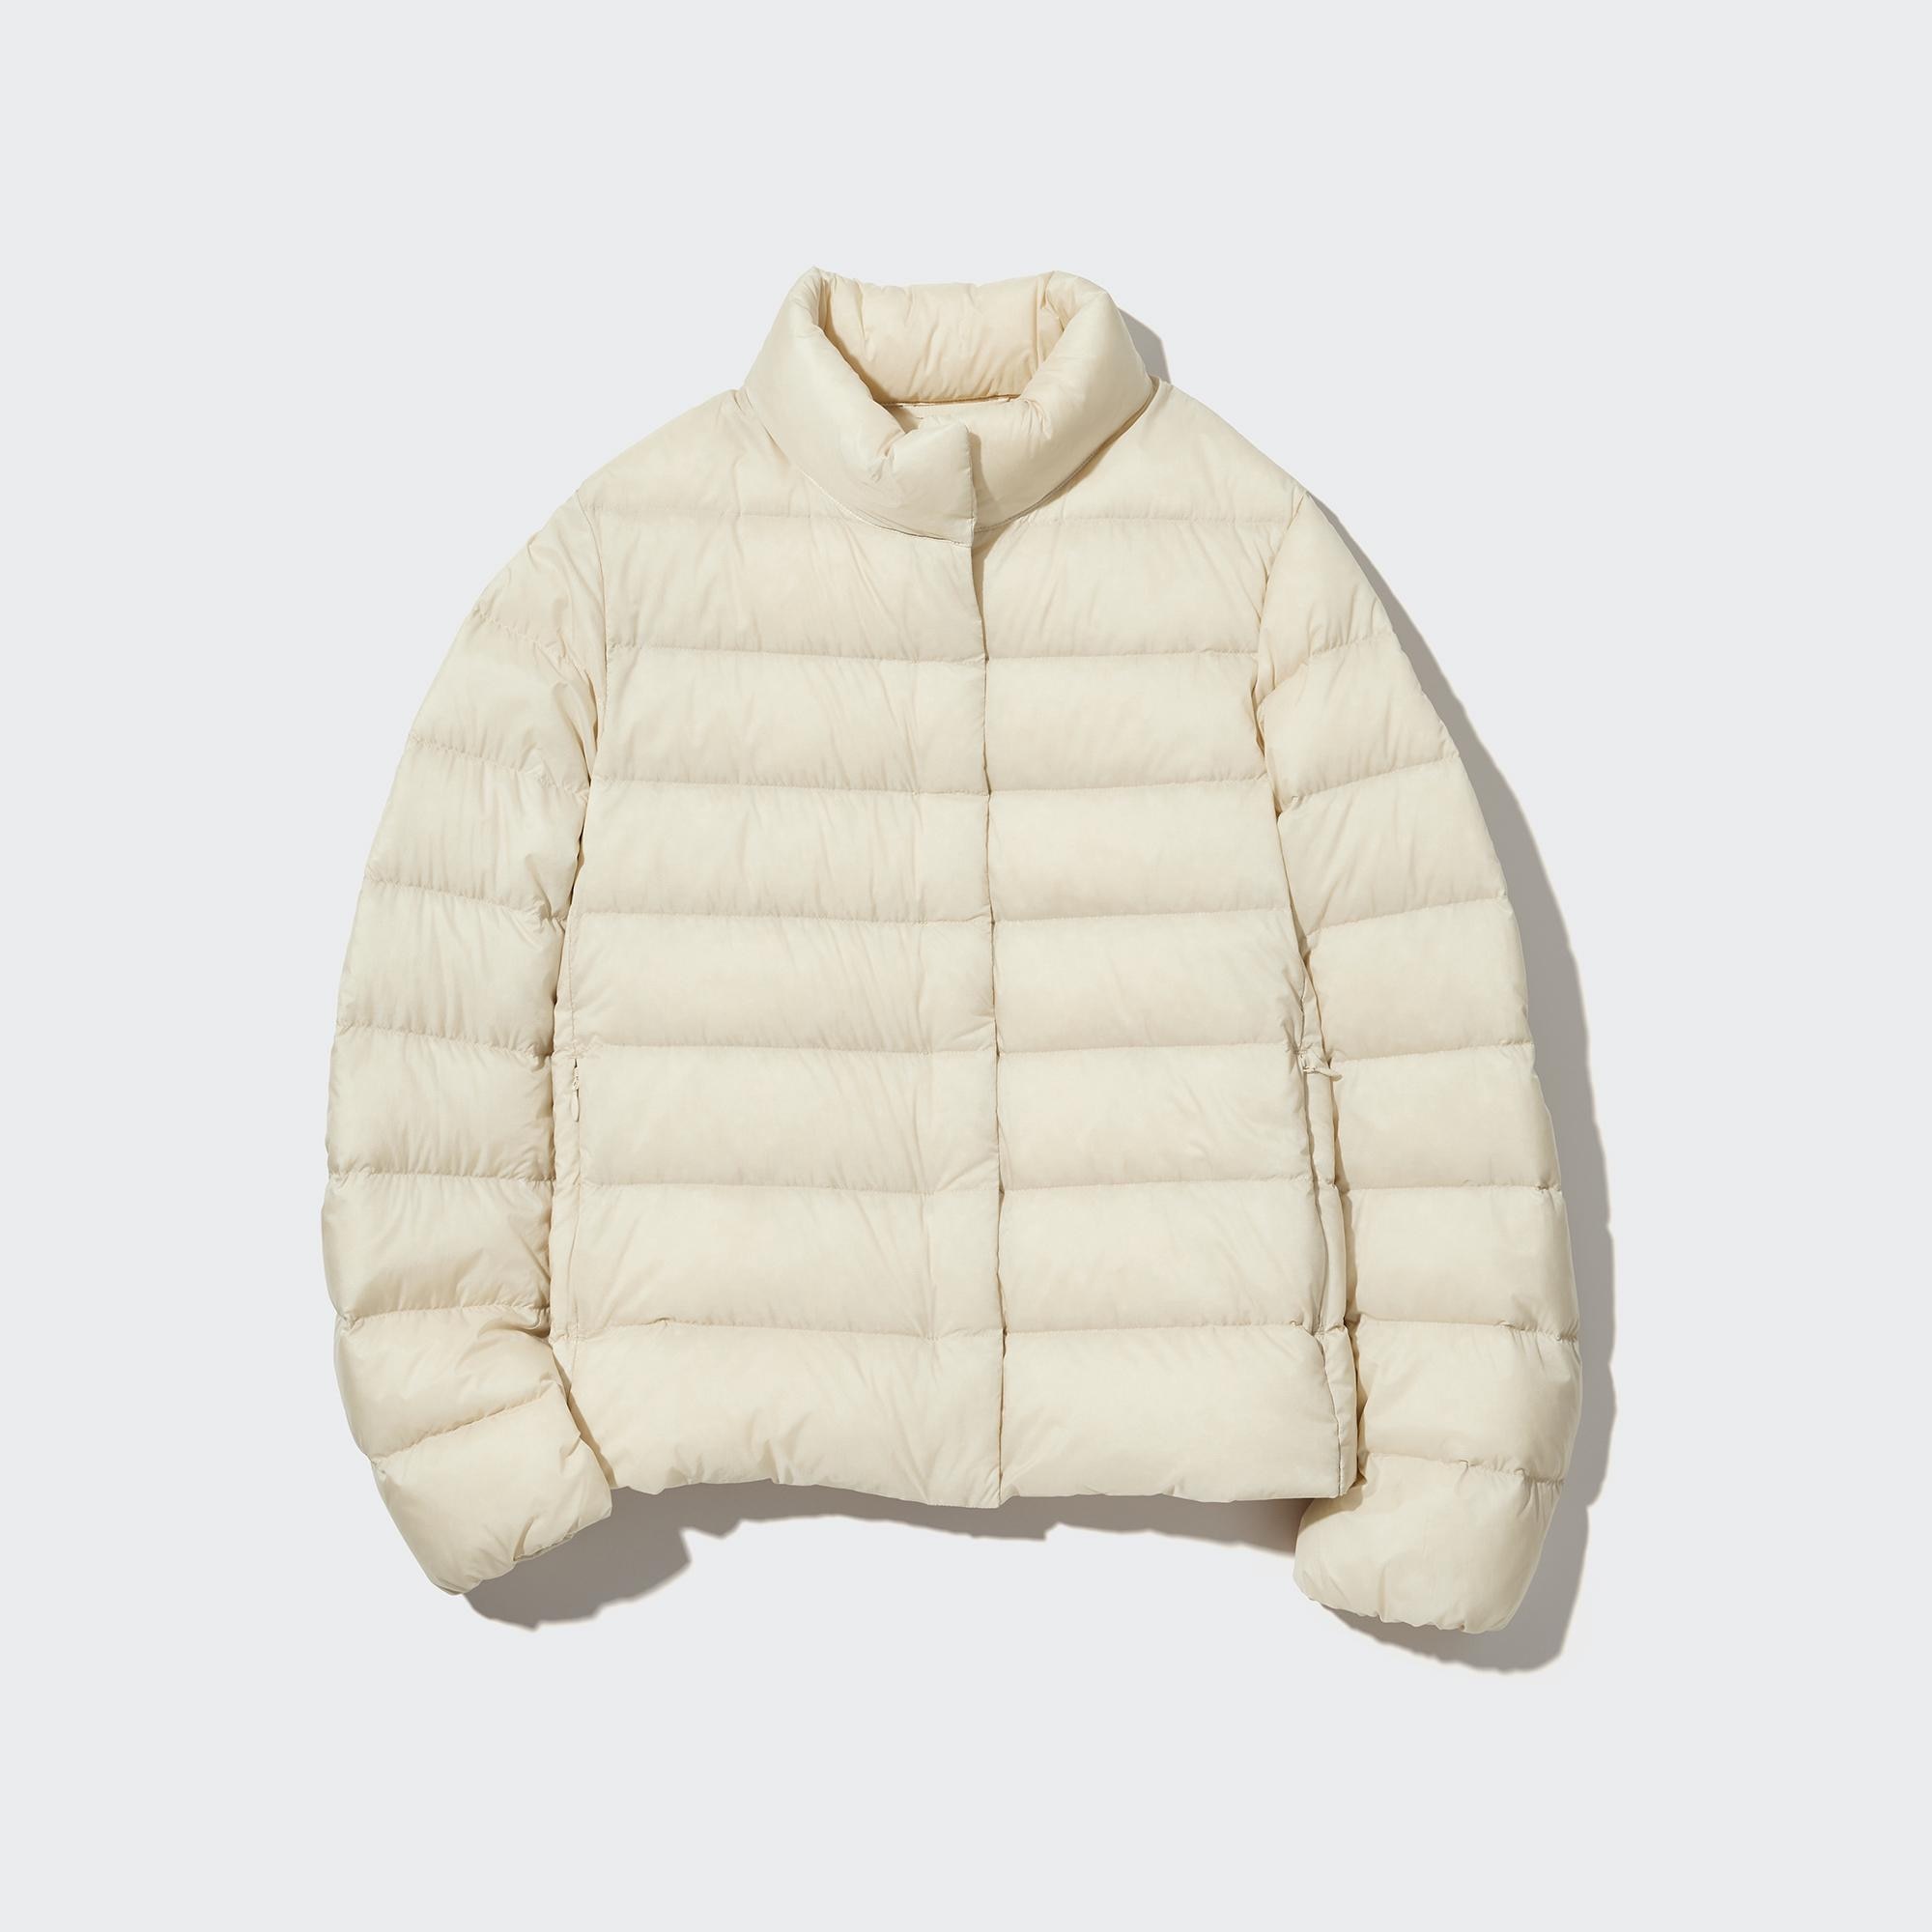 The HUGELY Popular Uniqlo Puffer Coat Is Back In 6 Colors  The Mom Edit